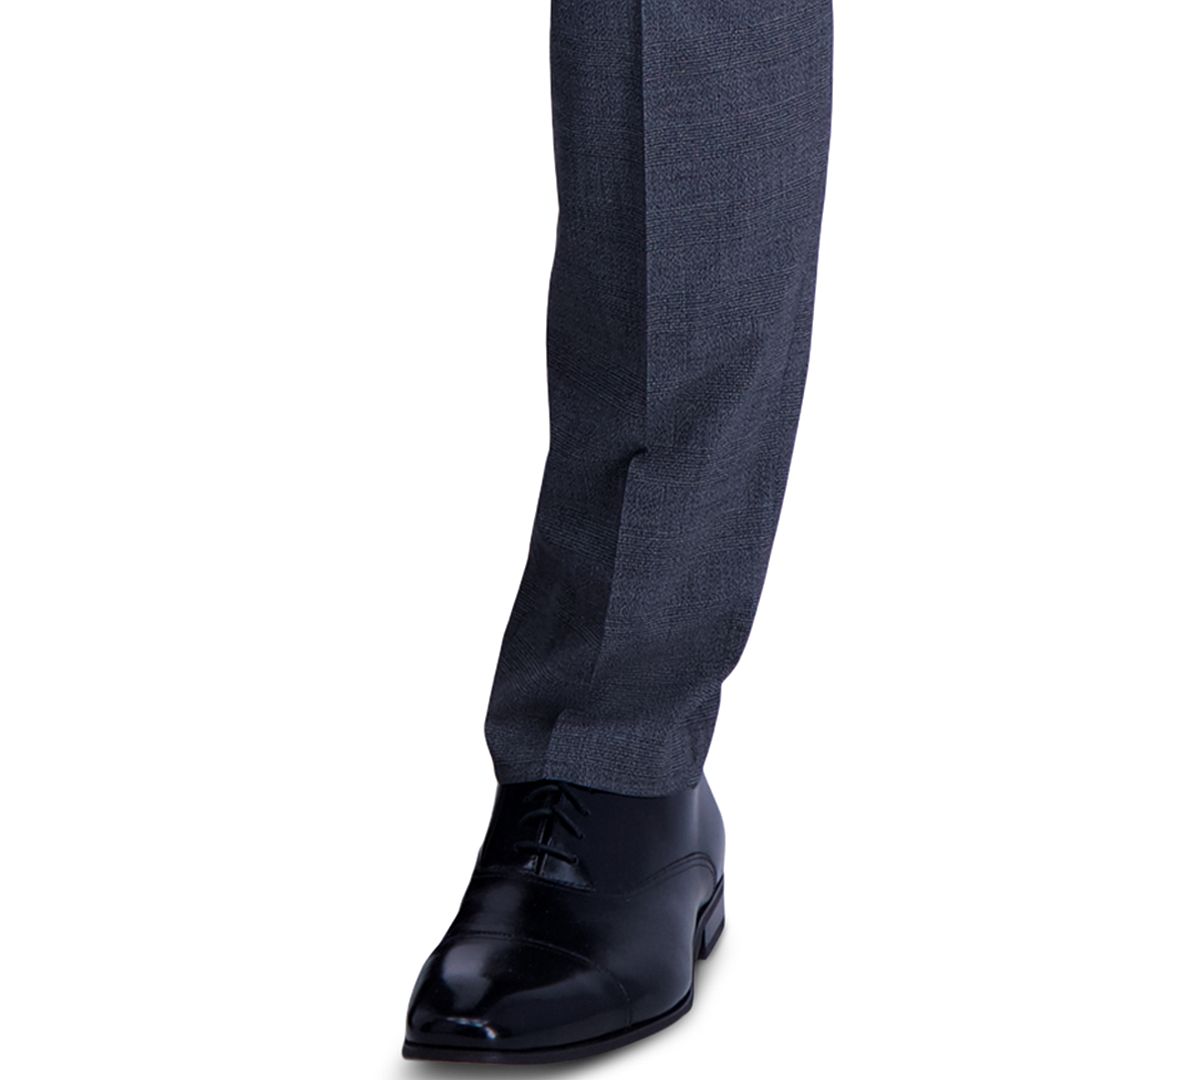 Kenneth Cole Reaction Slim-fit Stretch Heathered Glen Plaid Dress Pants Charcoal